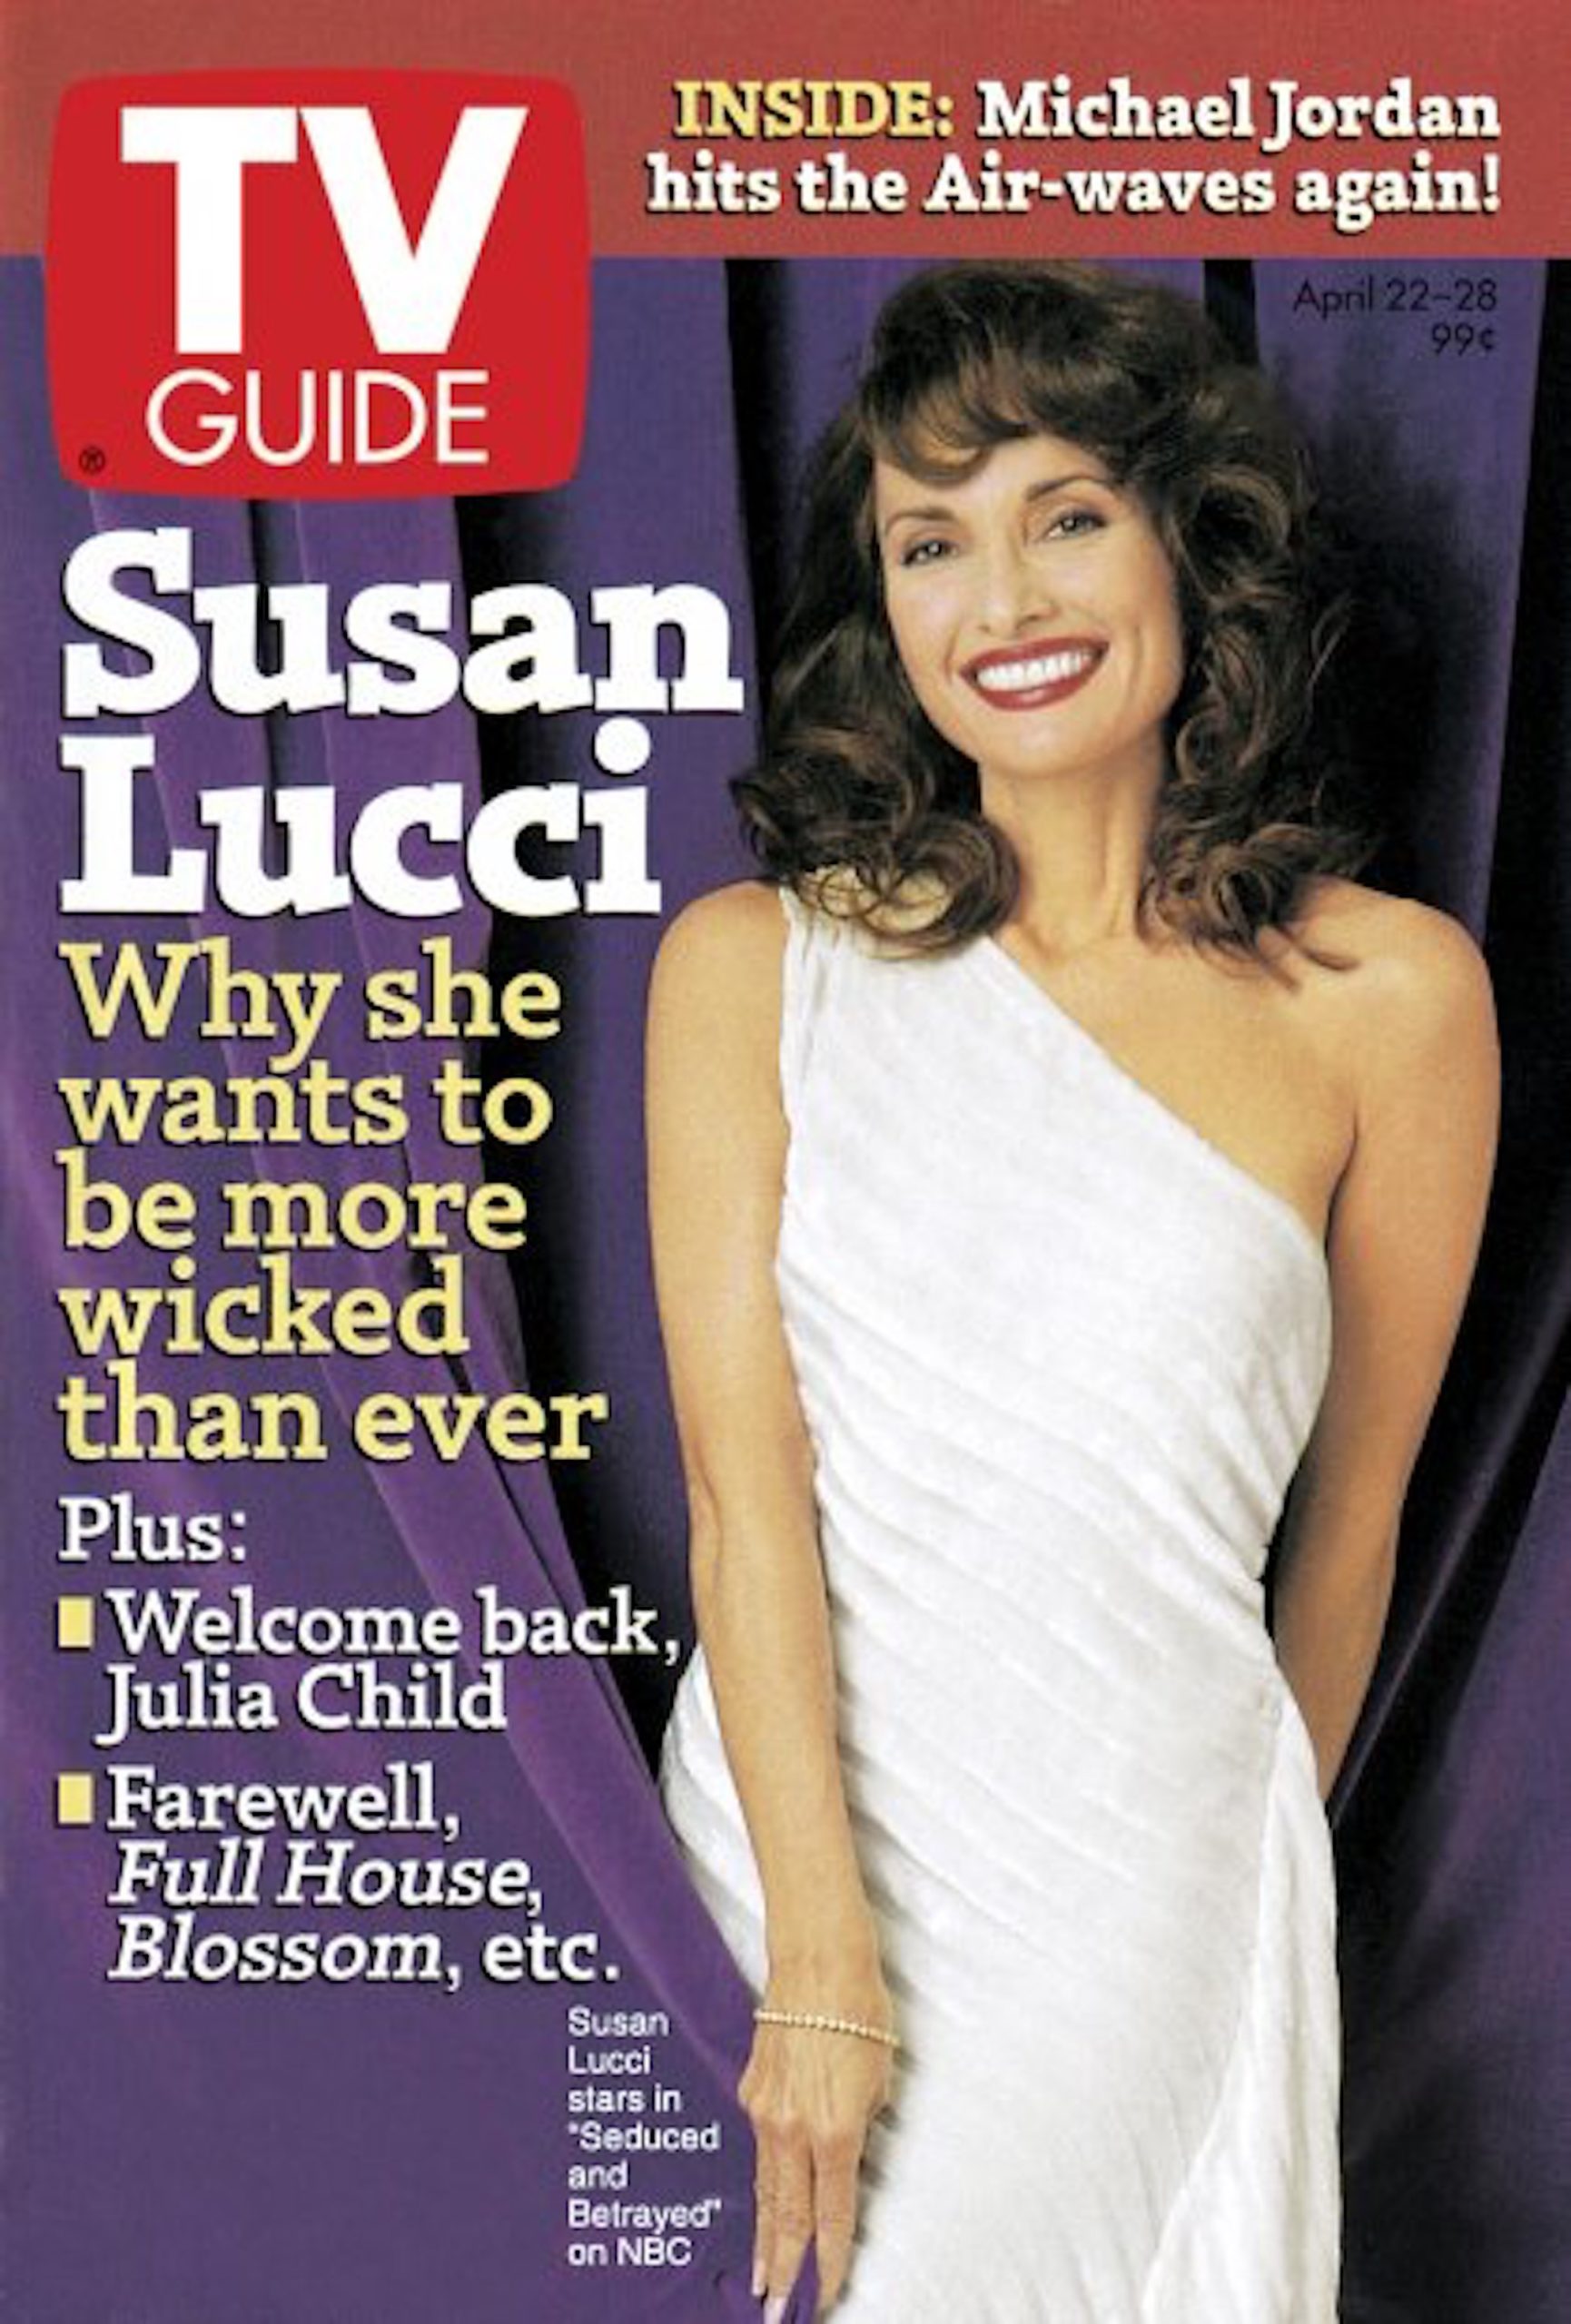 Susan Lucci on the cover of TV Guide - April 22, 1995